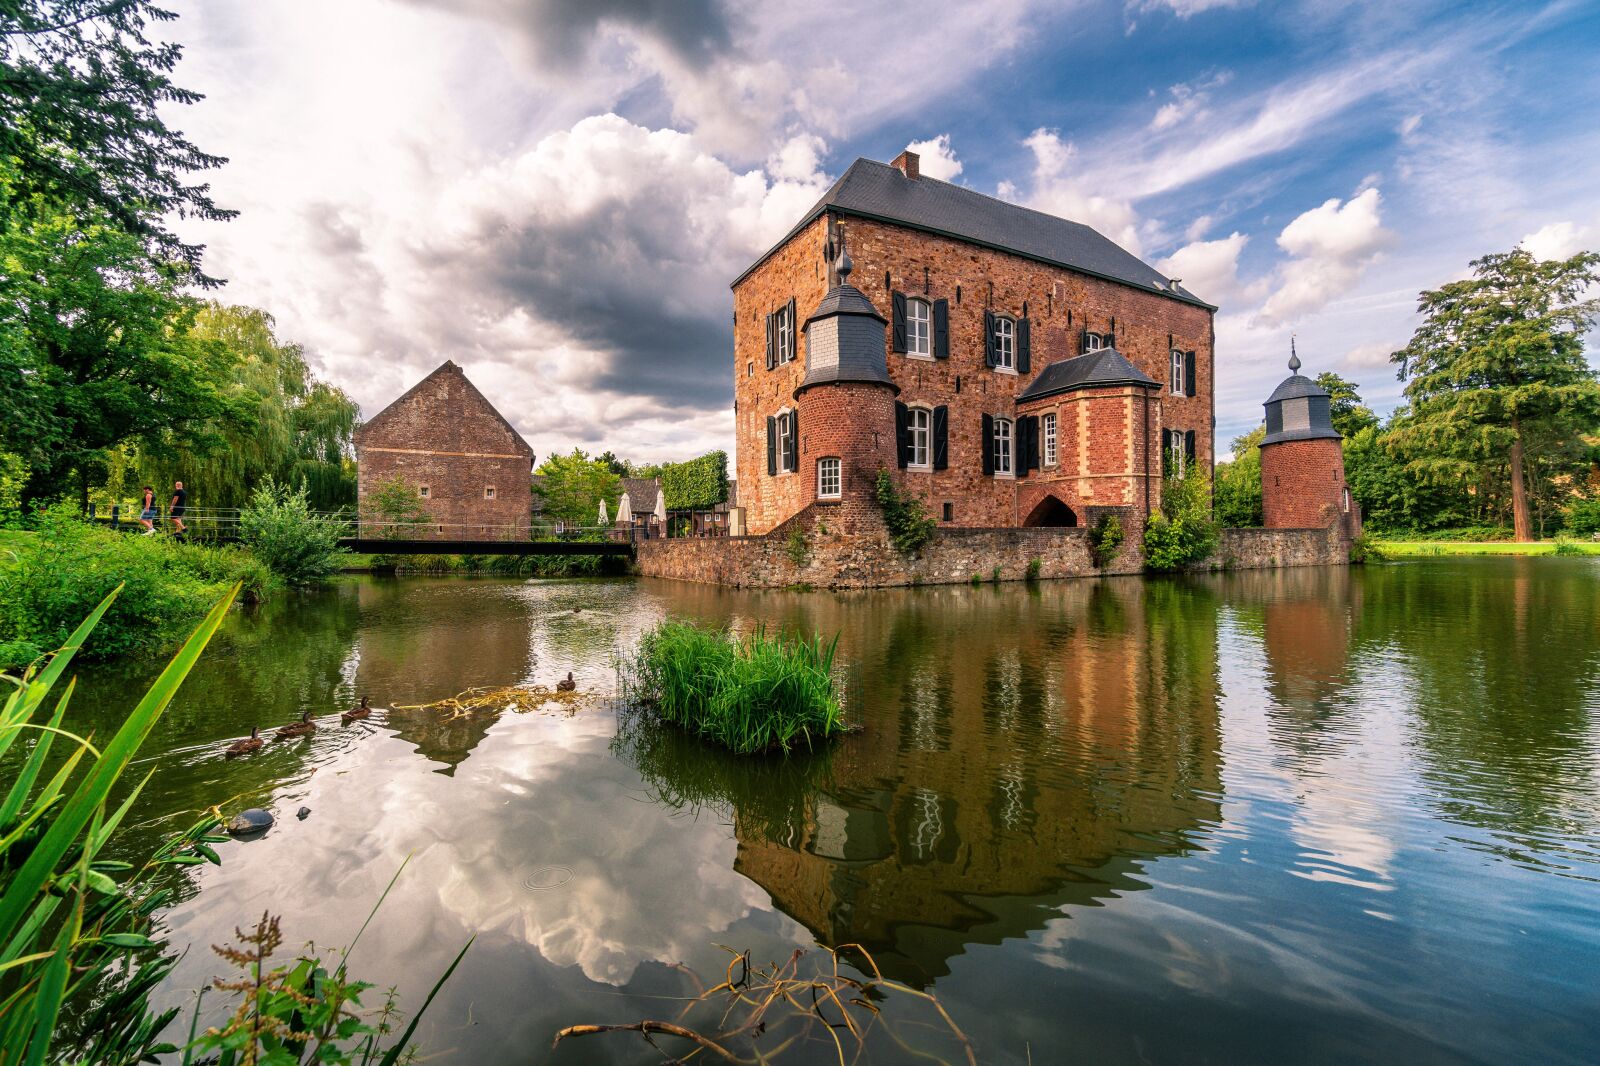 Sony E 10-18mm F4 OSS sample photo. Castle, moated castle, architecture photography